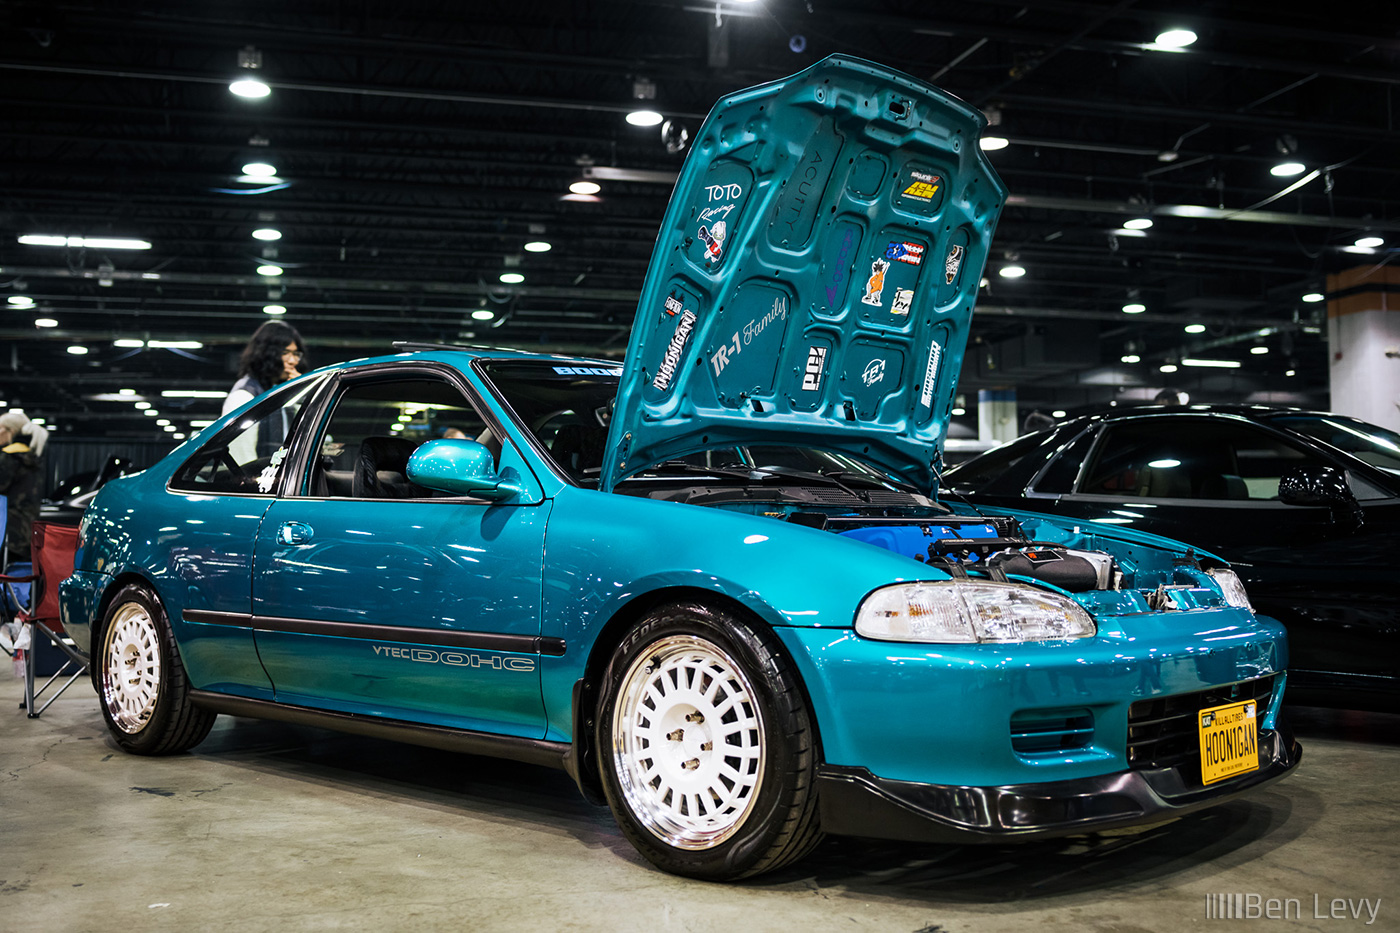 Clean K-Swapped Civic Coupe in Teal